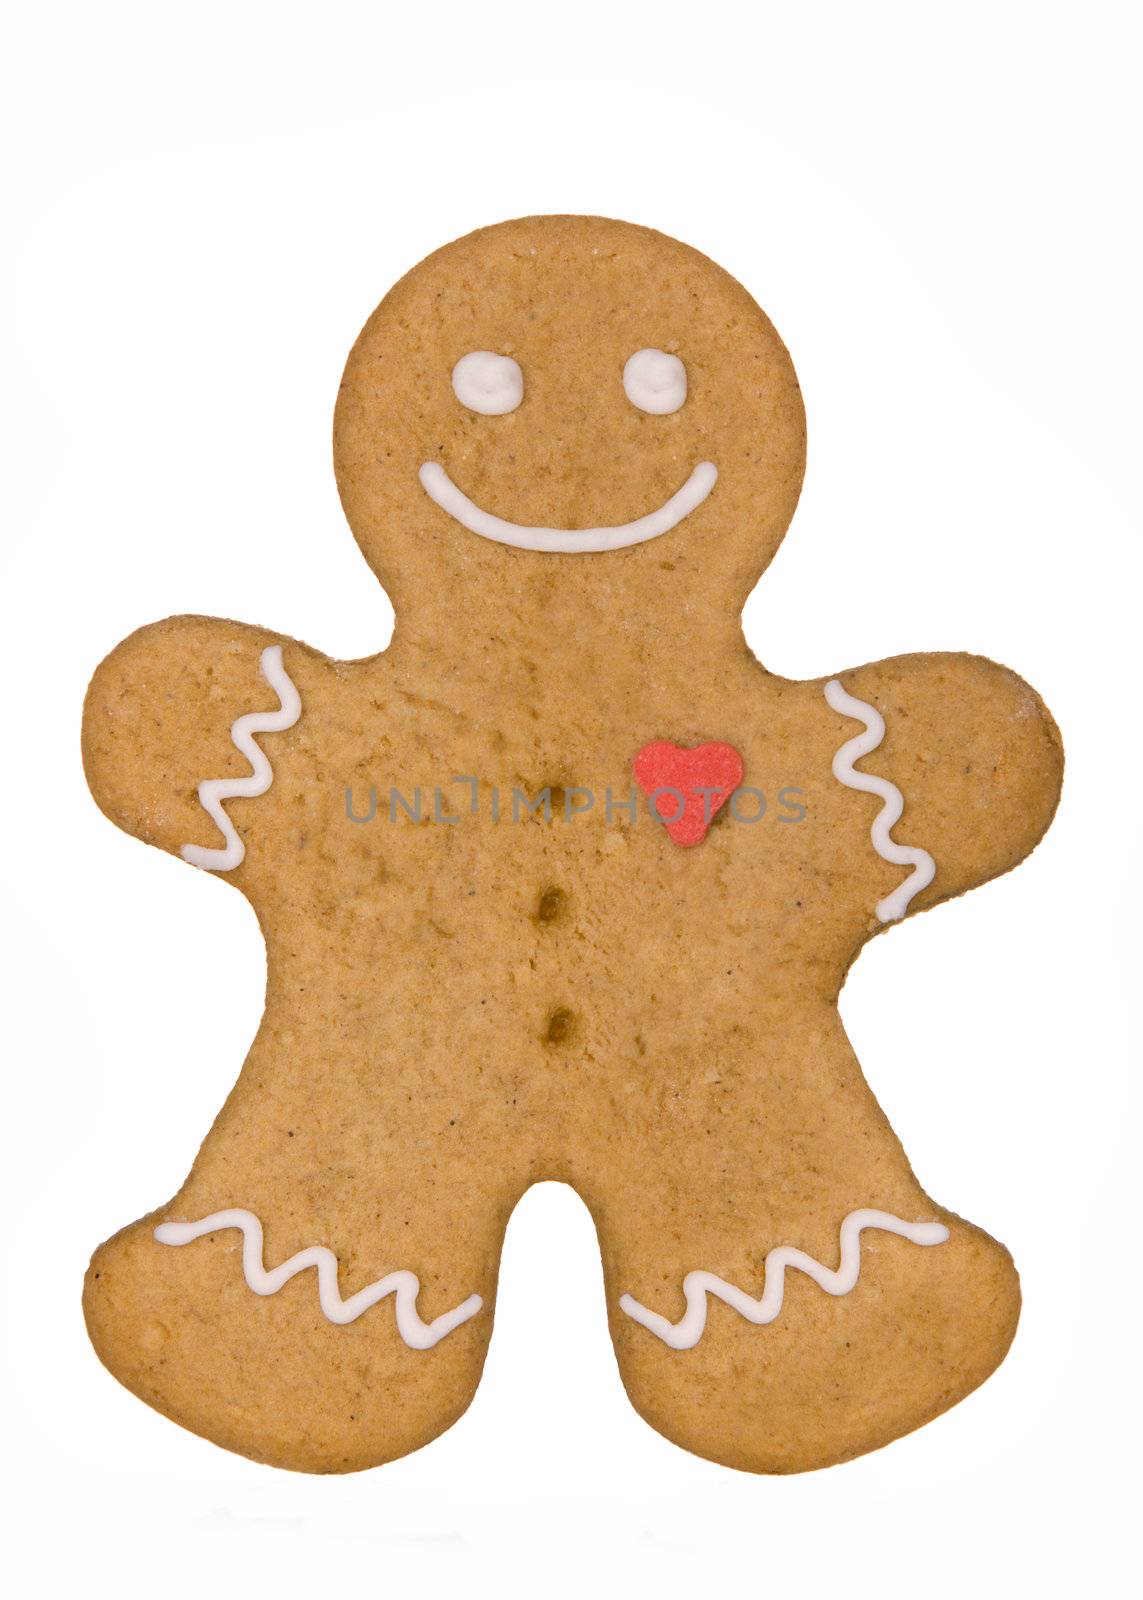 Gingerbread man with candy loveheart